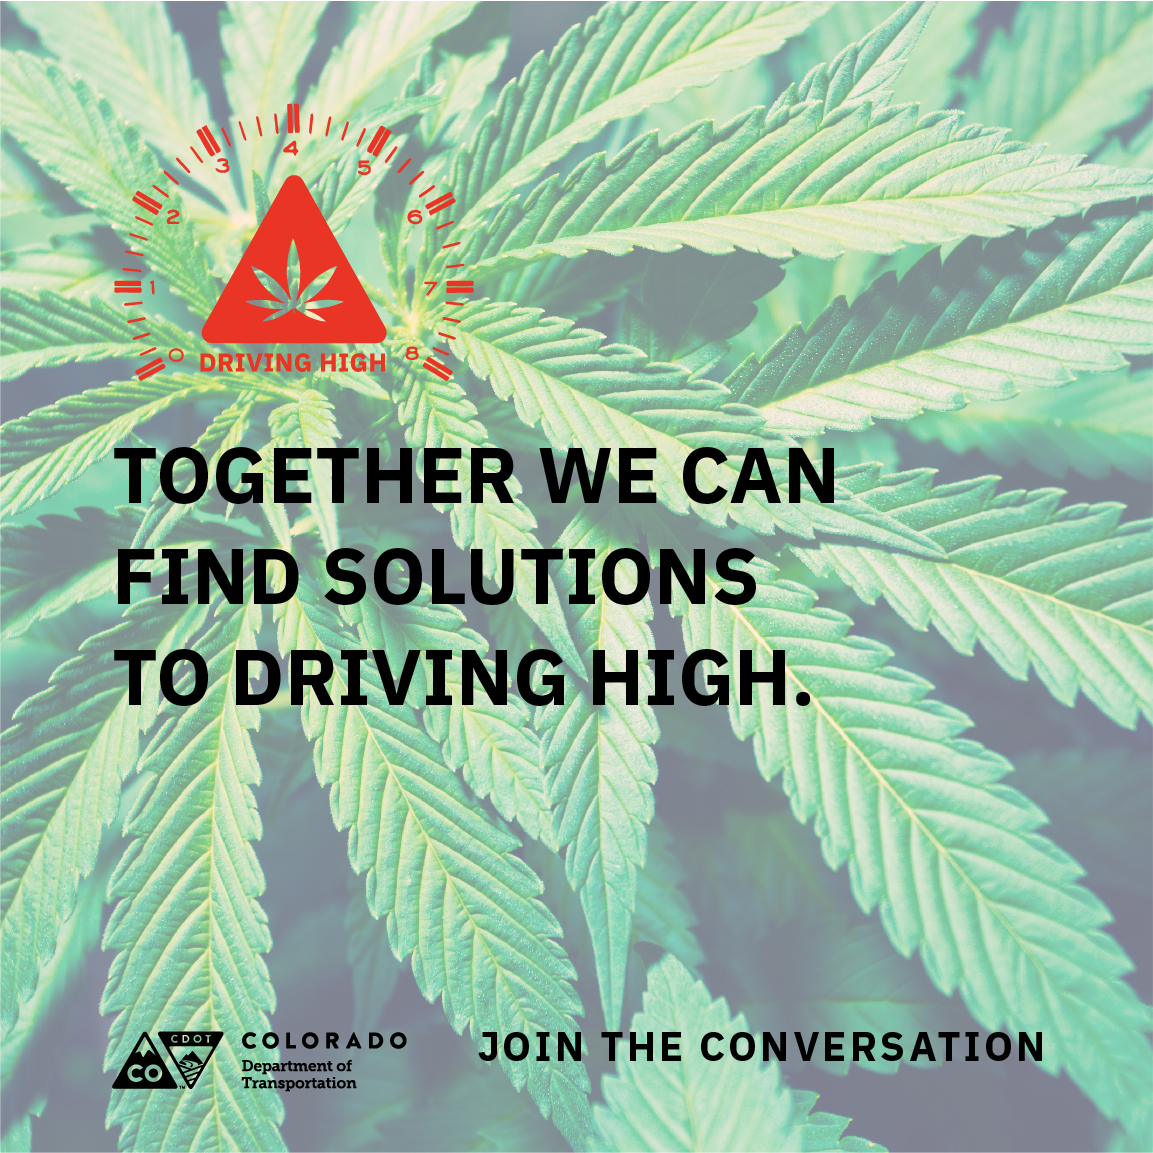 CD038_CannabisConversations_GraphicKit_Mech_v1_English_Square_C.jpg detail image